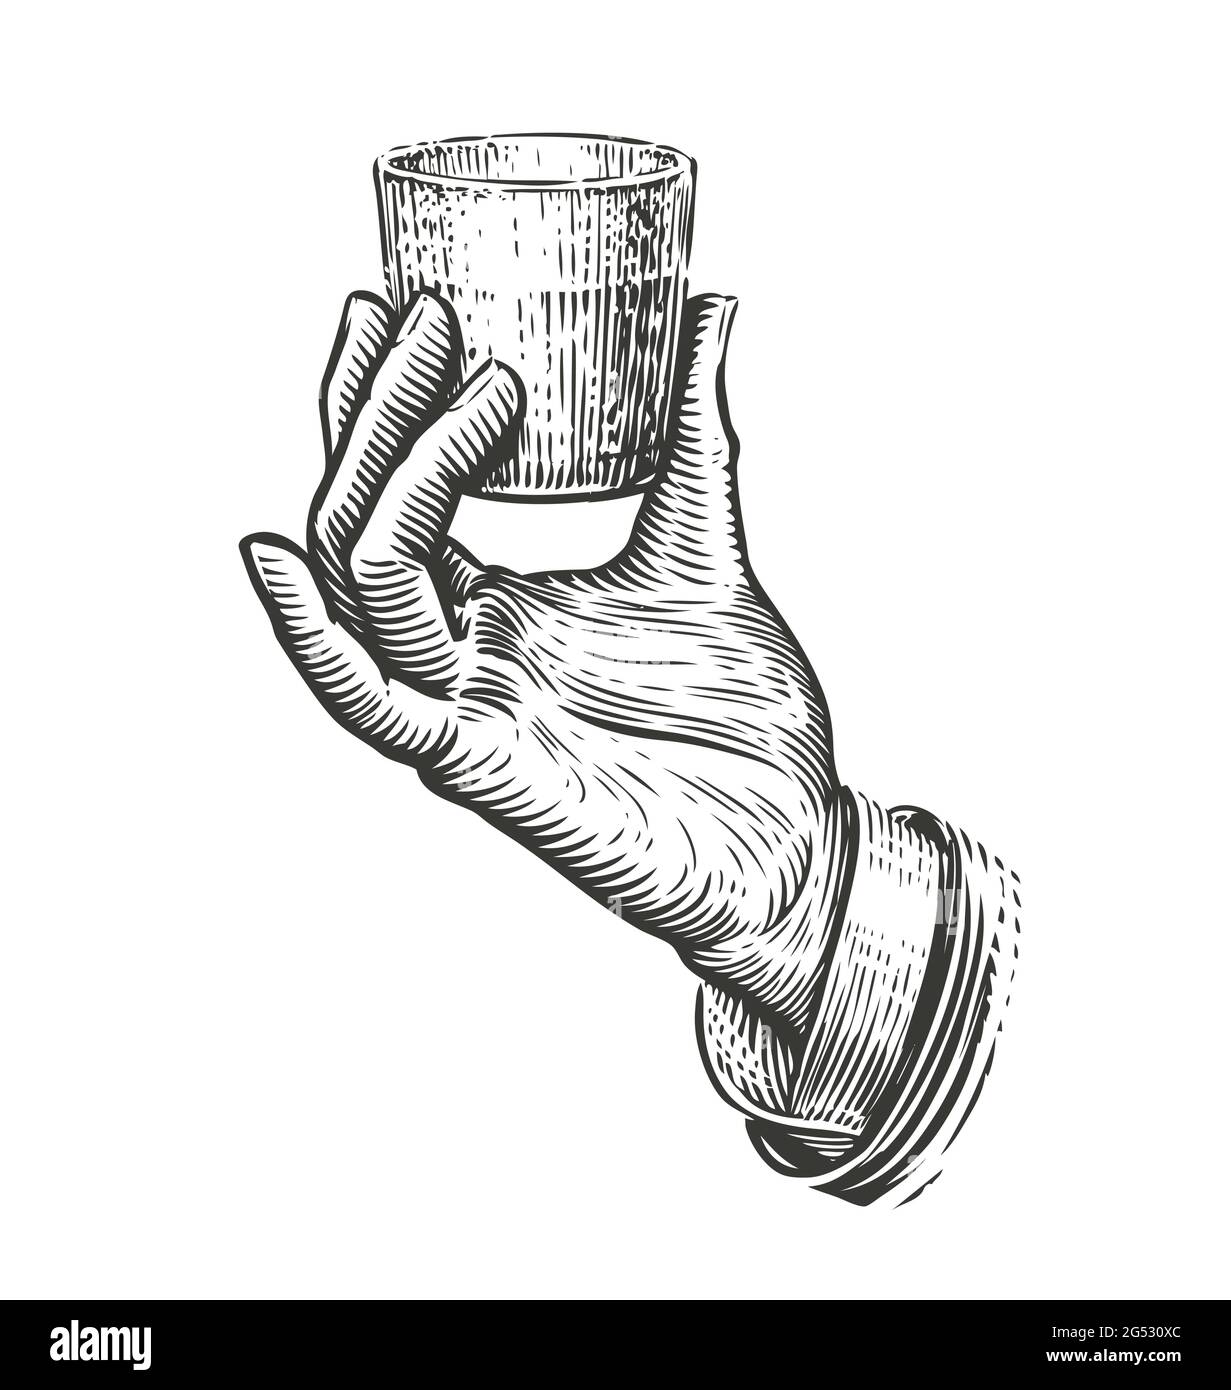 Hand holding a glass. Illustration drawn in vintage engraving style Stock Vector